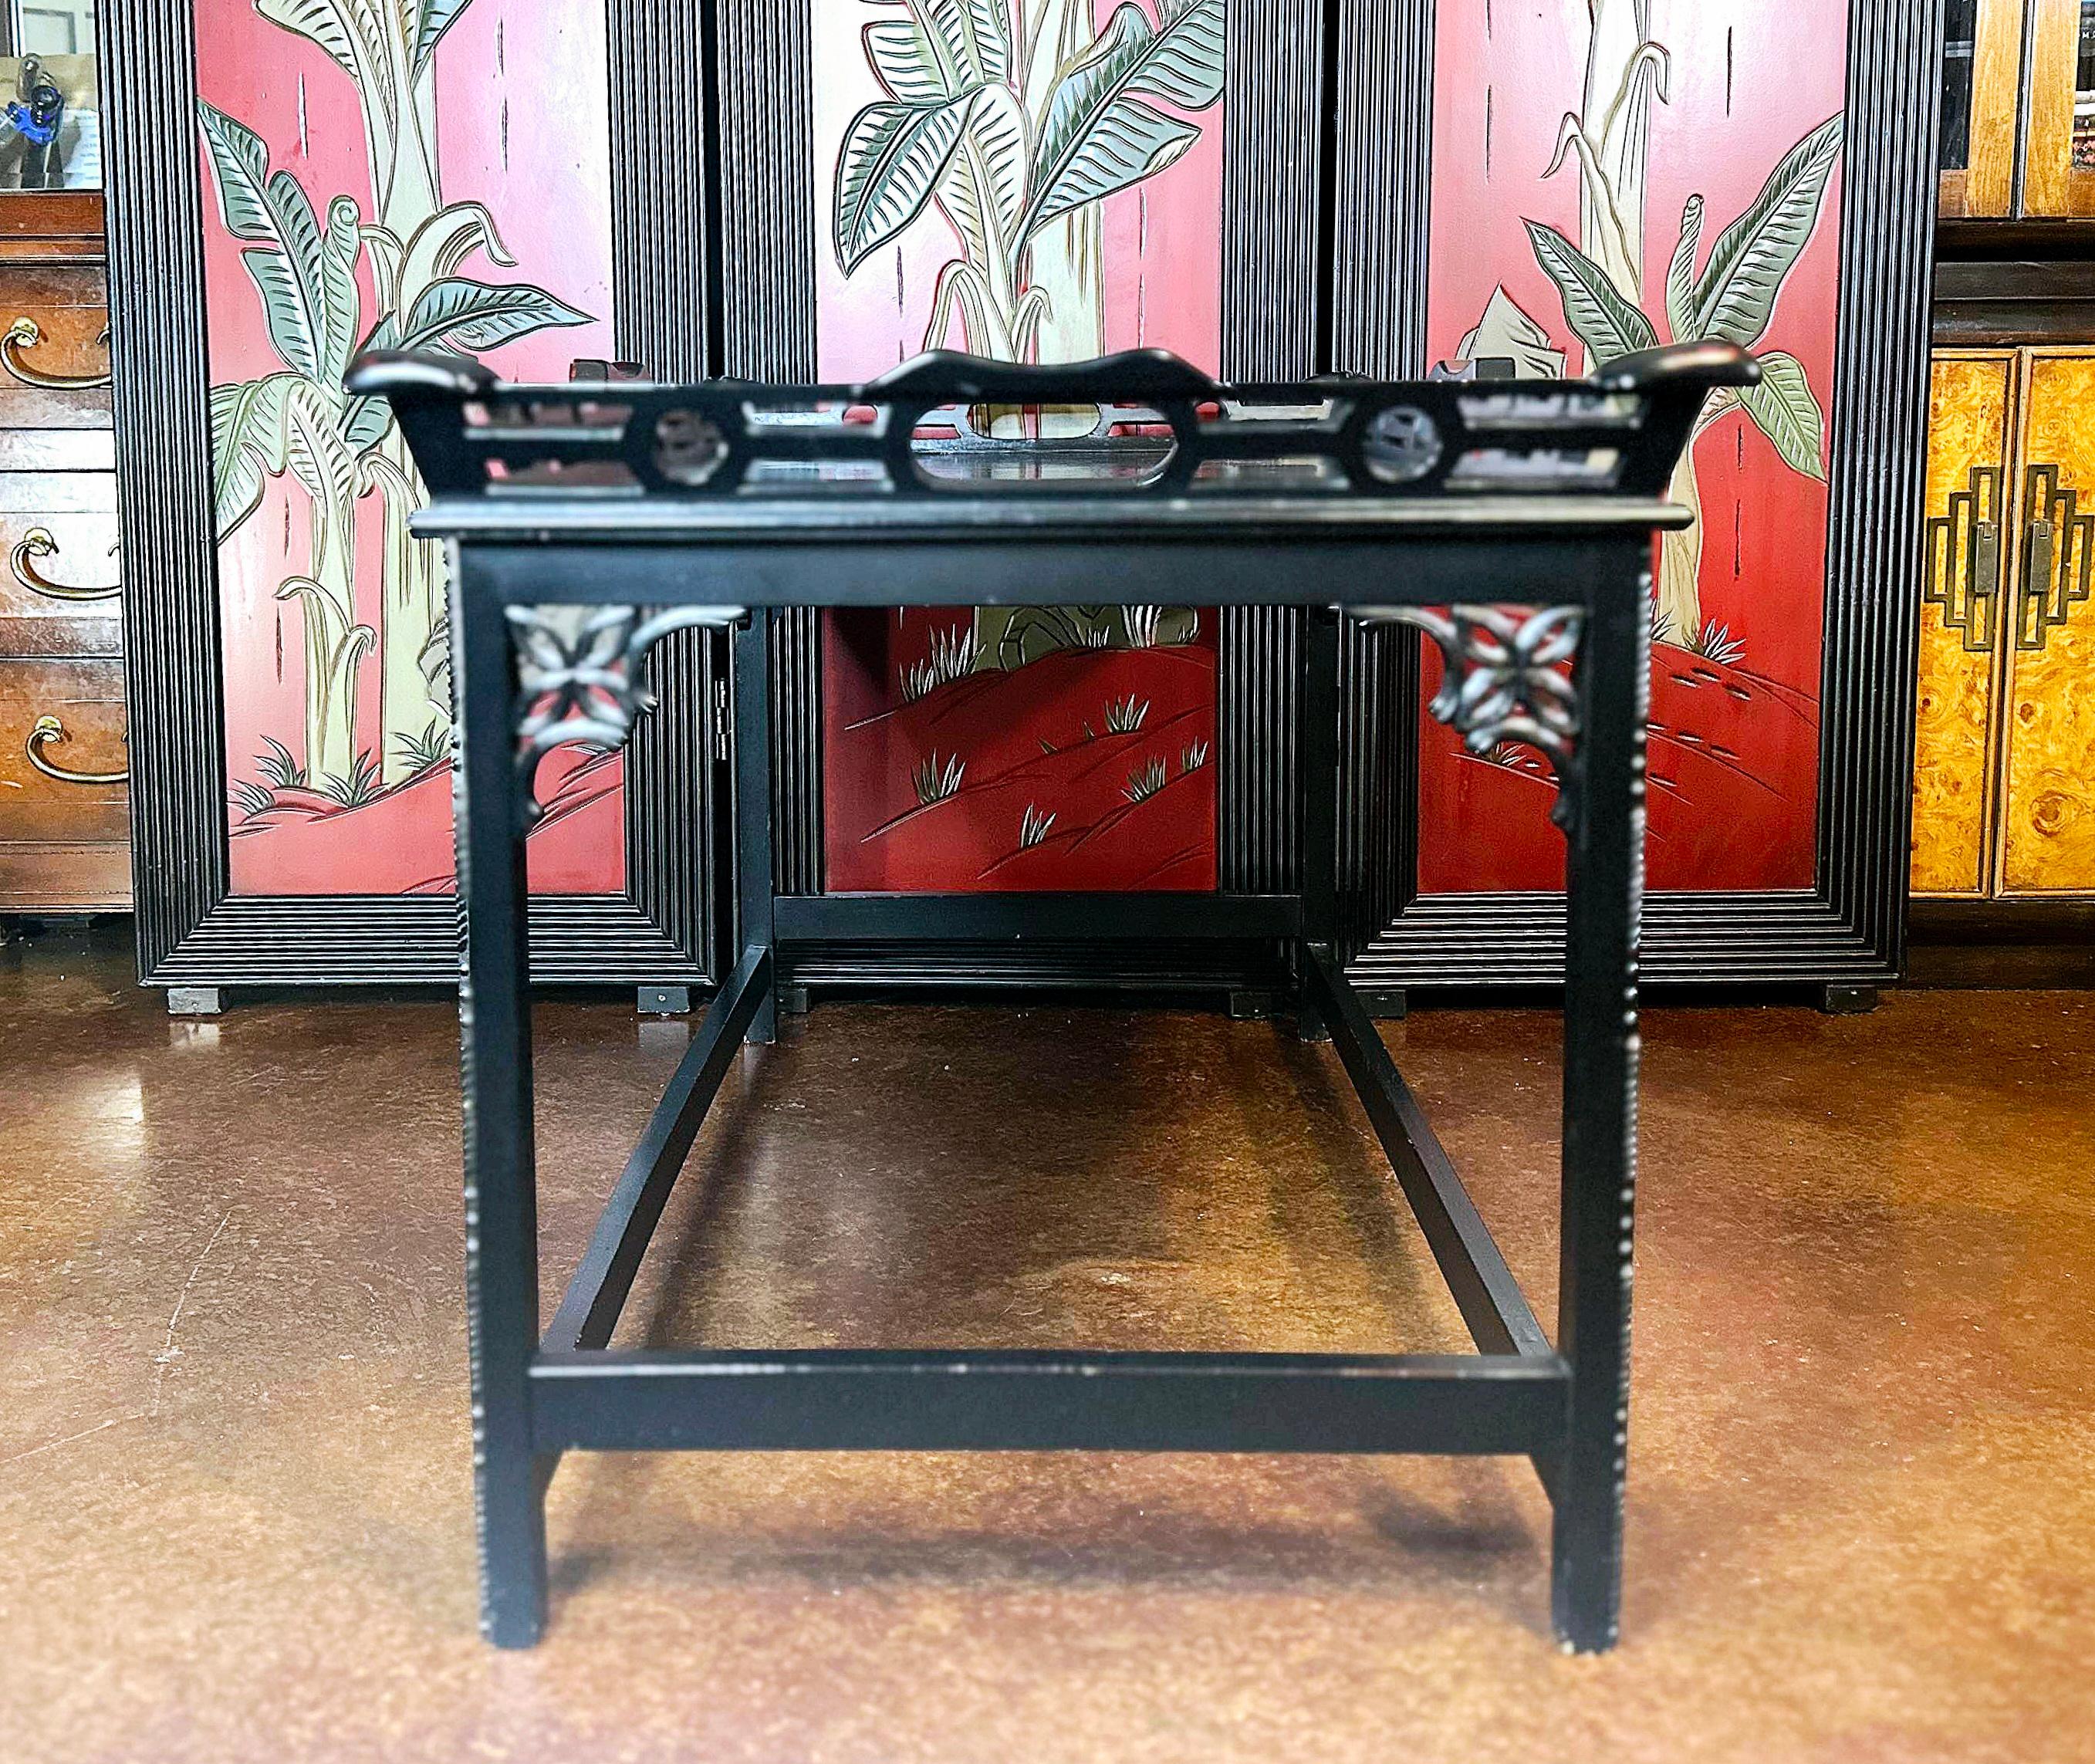 Classic Chippendale styling. 
Black ebonized coffee table. 
Lotus flower details in the supports joining the legs.
Intricate subtle carvings on the legs.
Would compliment a wide variety of styles. 
Hollywood Regency. 
Chinoiserie. 
Chippendale. 

